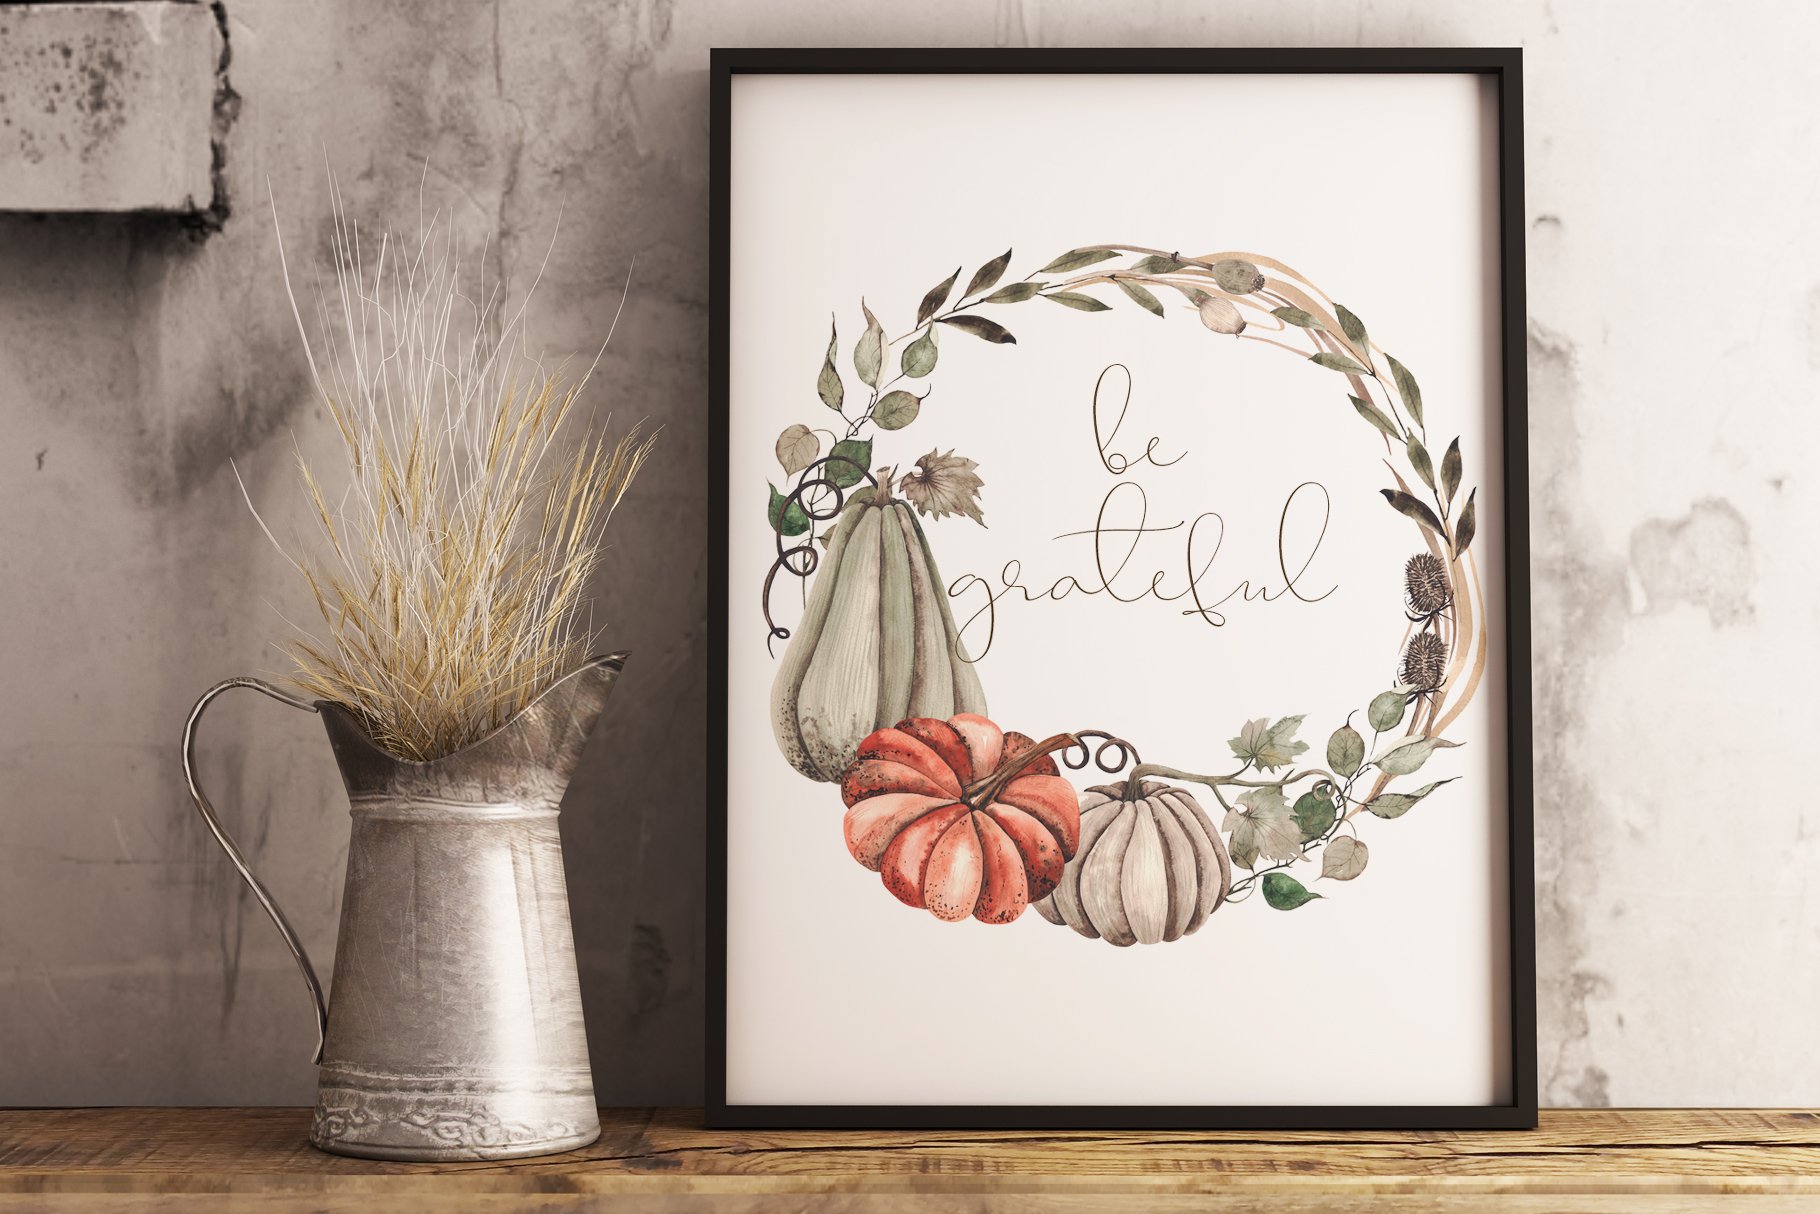 Deliate and stylish poster with an autumn wreath which will perfect for a farm house.